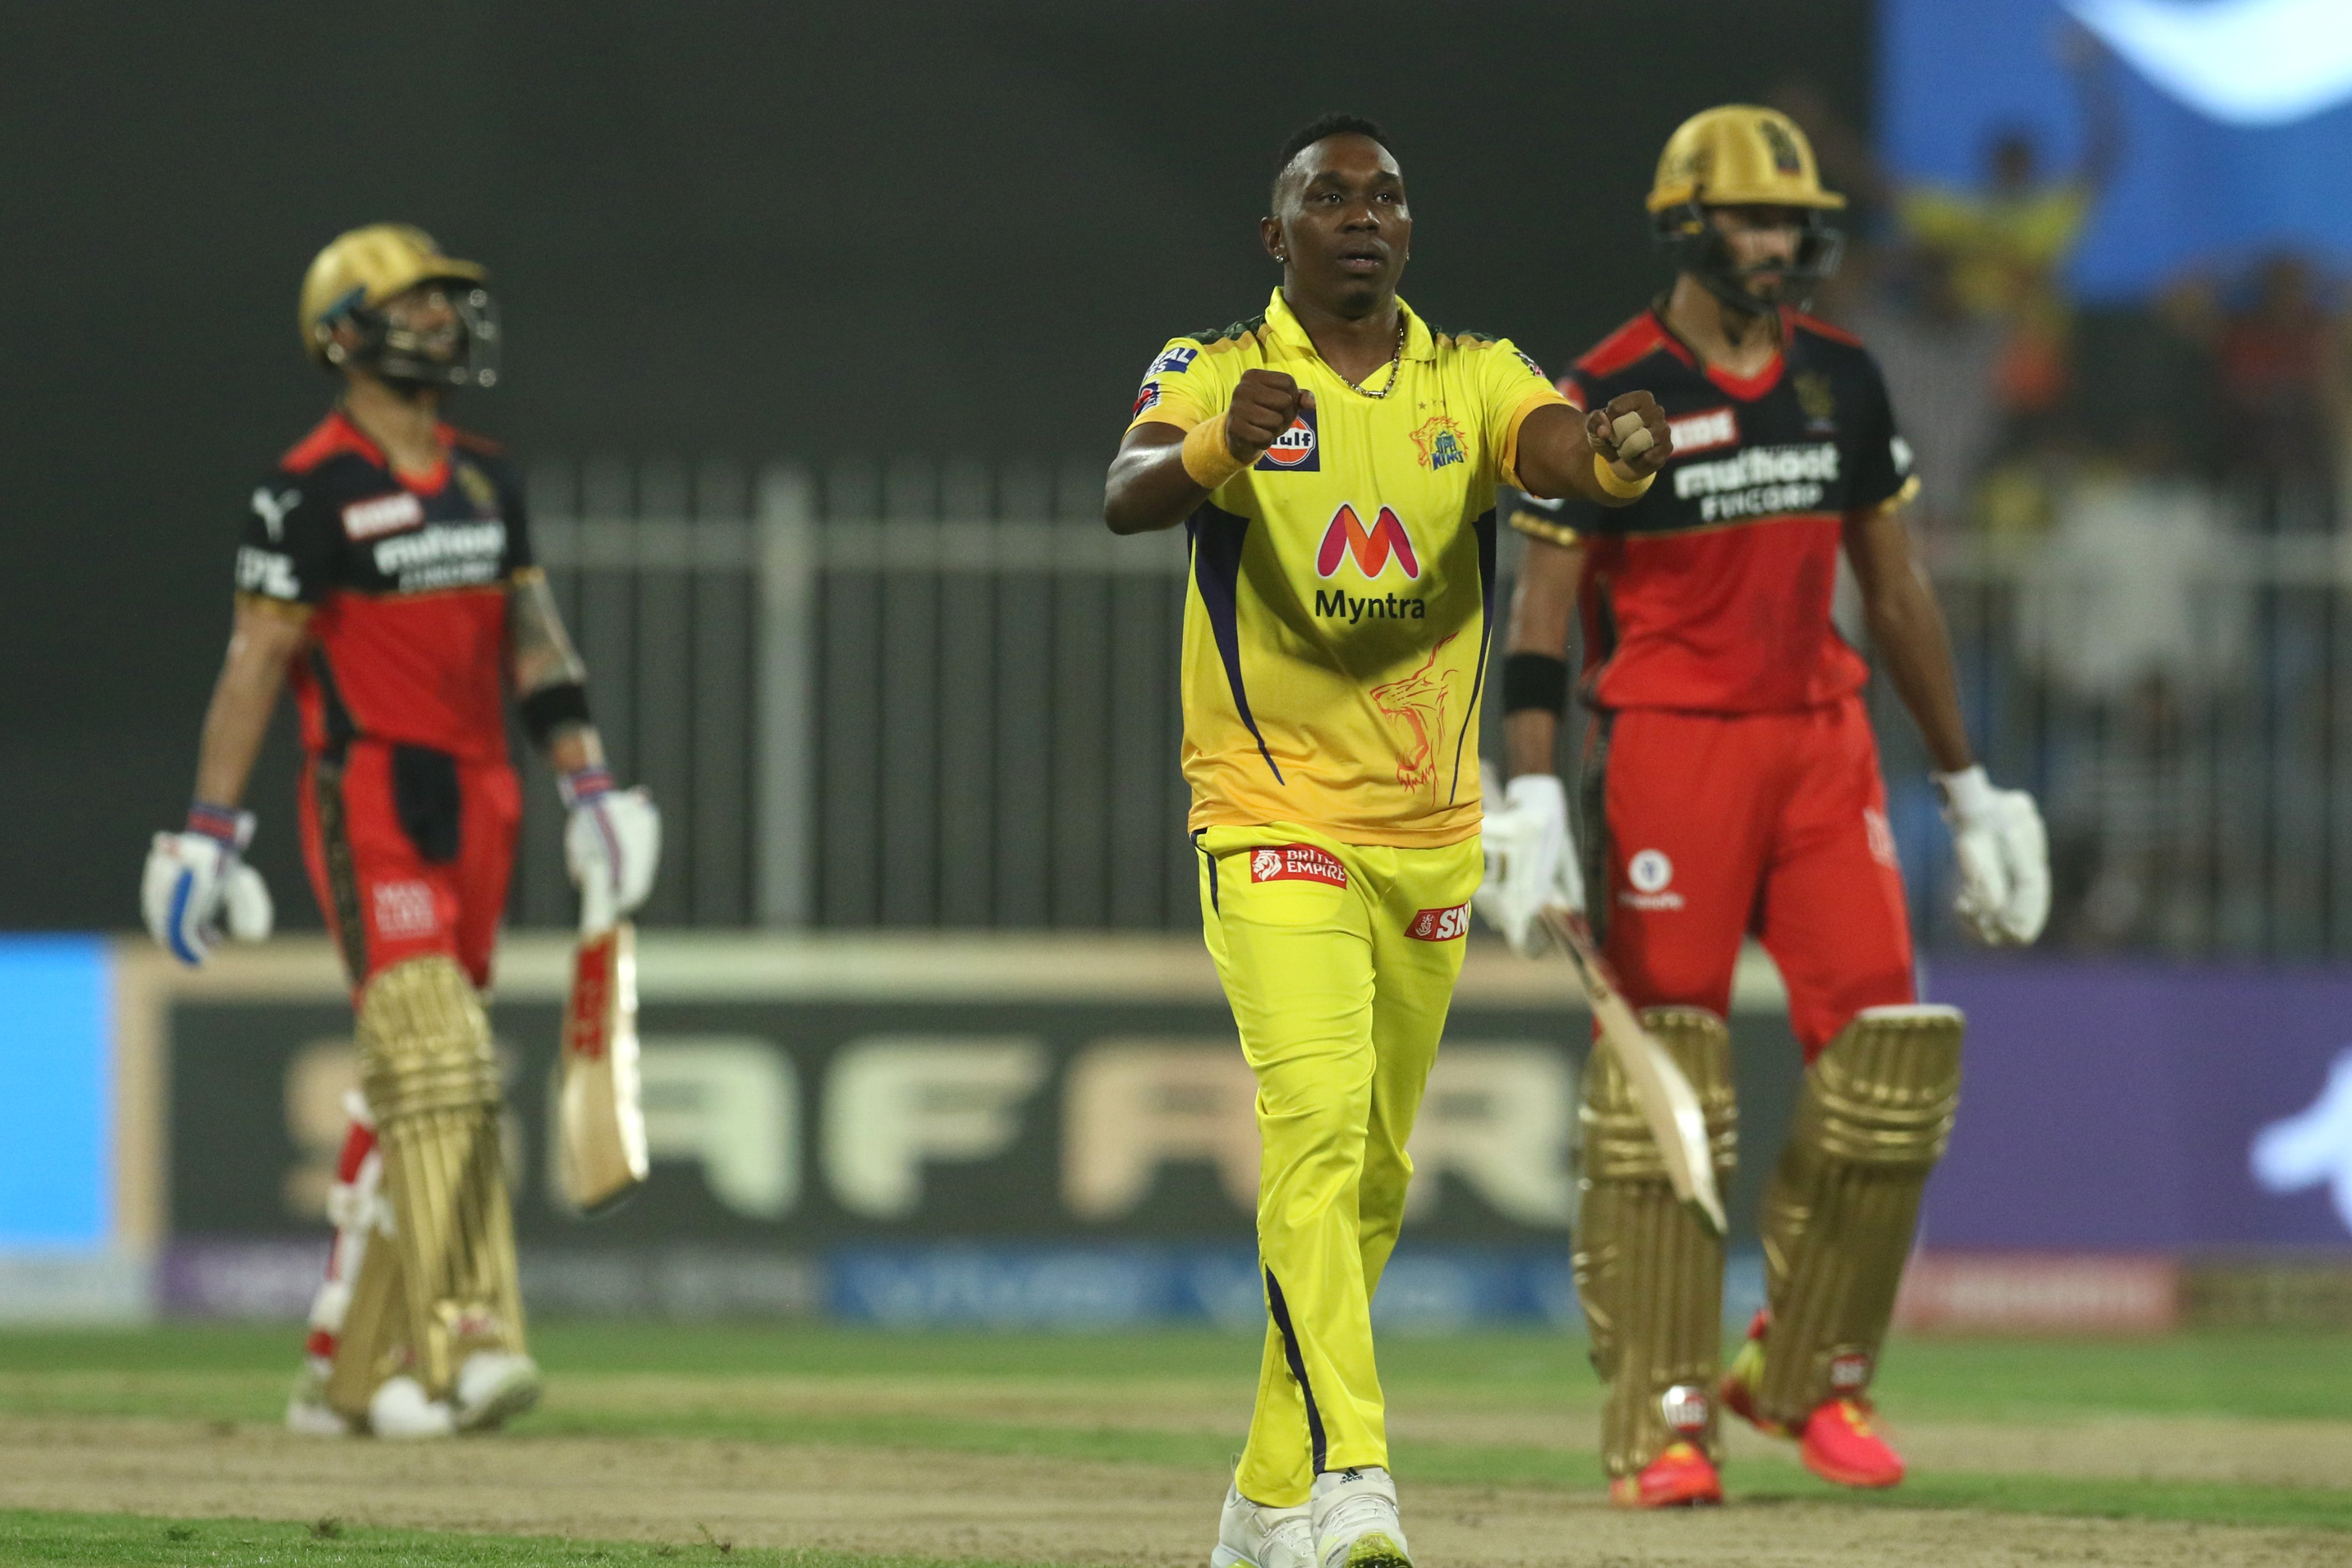 Dwayne Bravo was star of the show for CSK against RCB | BCCI/IPL